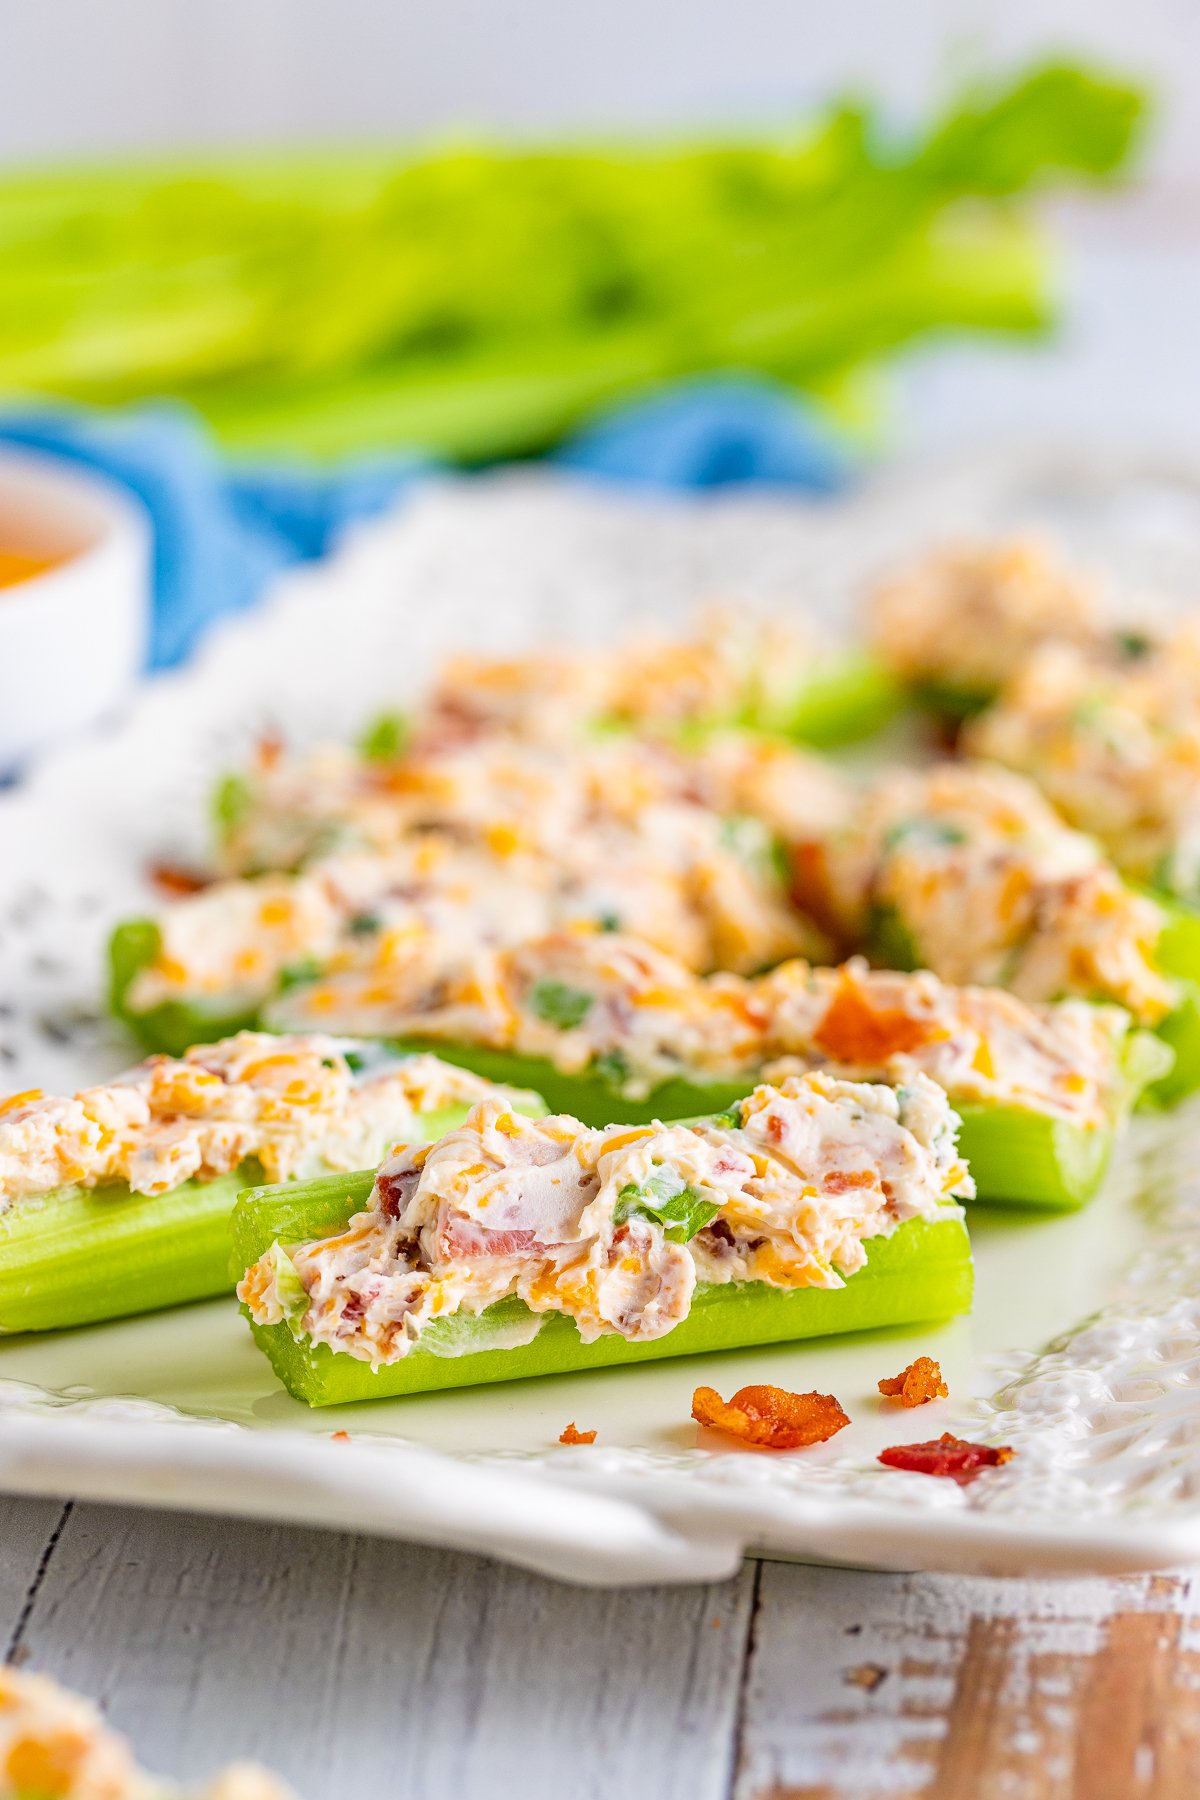 Cheddar Bacon Ranch Stuffed Celery Sticks lined up on white platter.